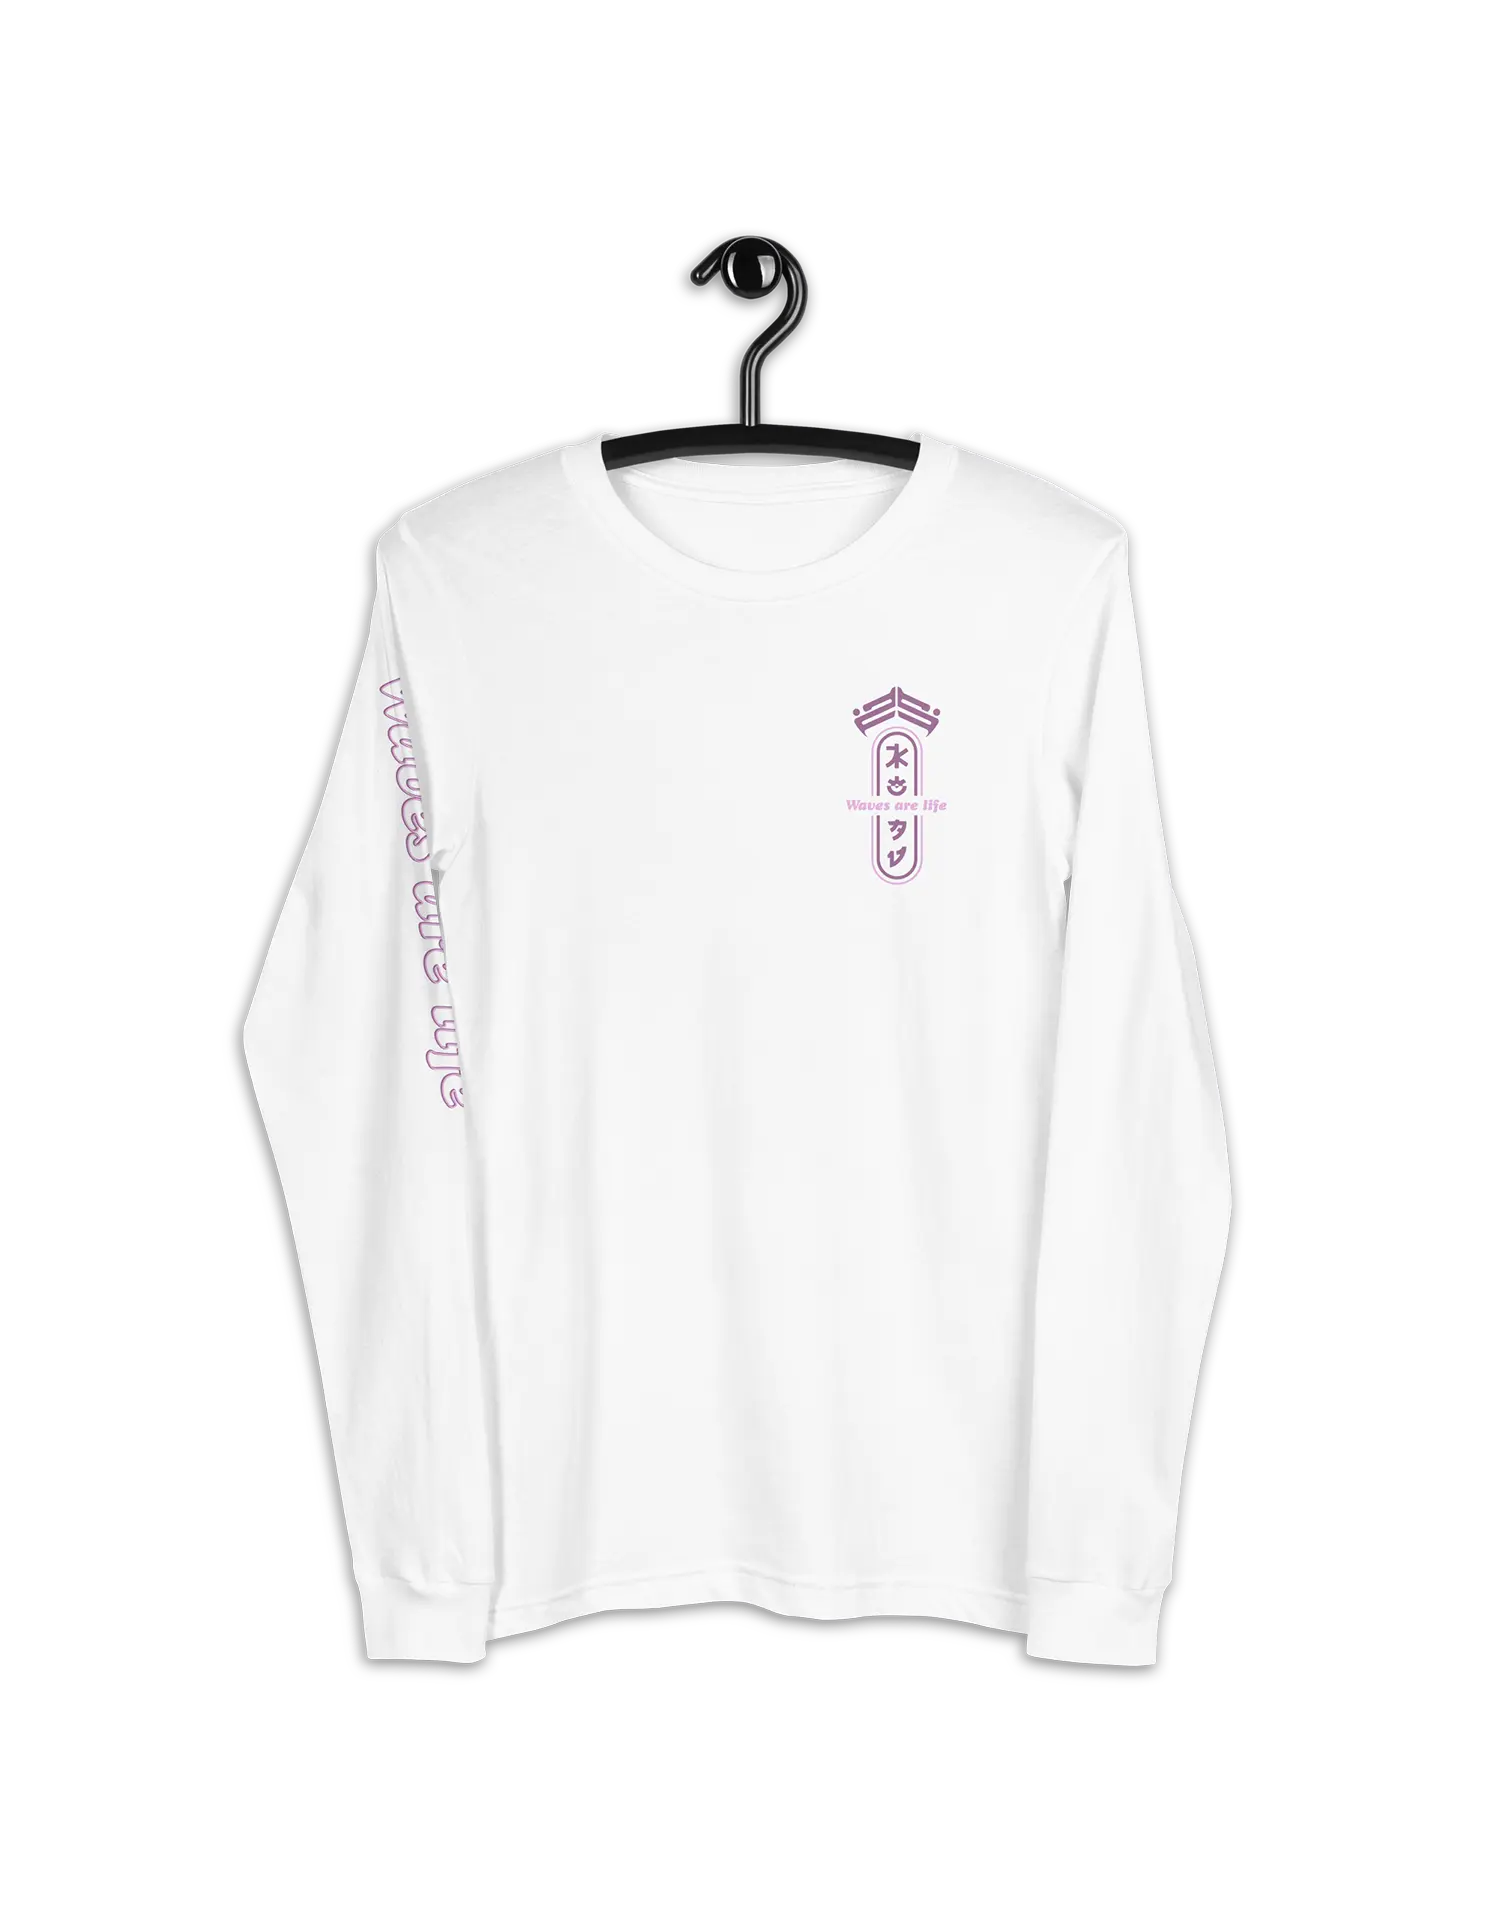 Waves are Life Premium White 100% Cotton Long Sleeve Tee by KOAV